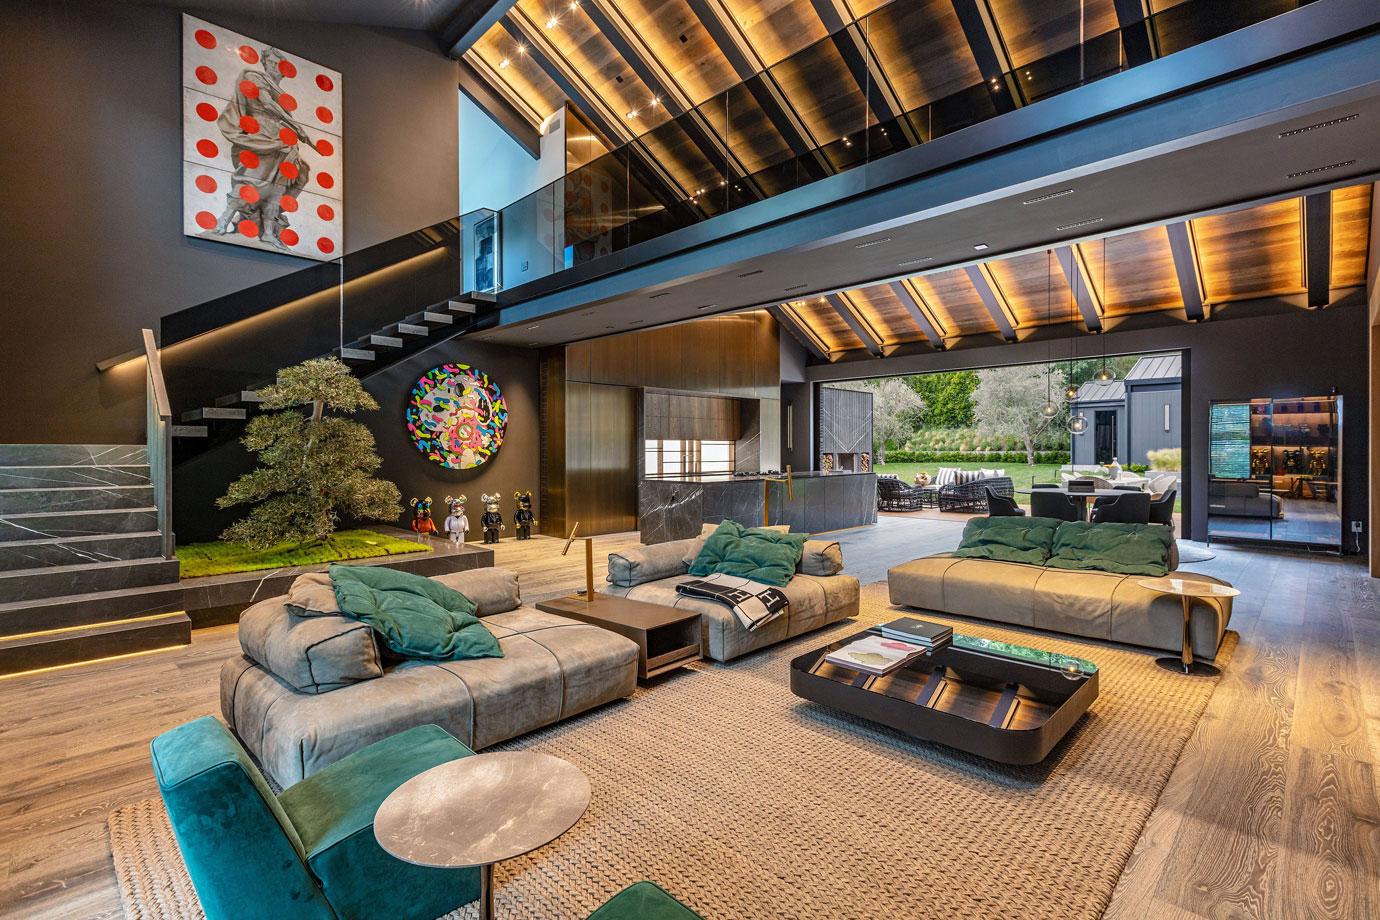 Inside Ben Simmons' $20 million mansion, with photos